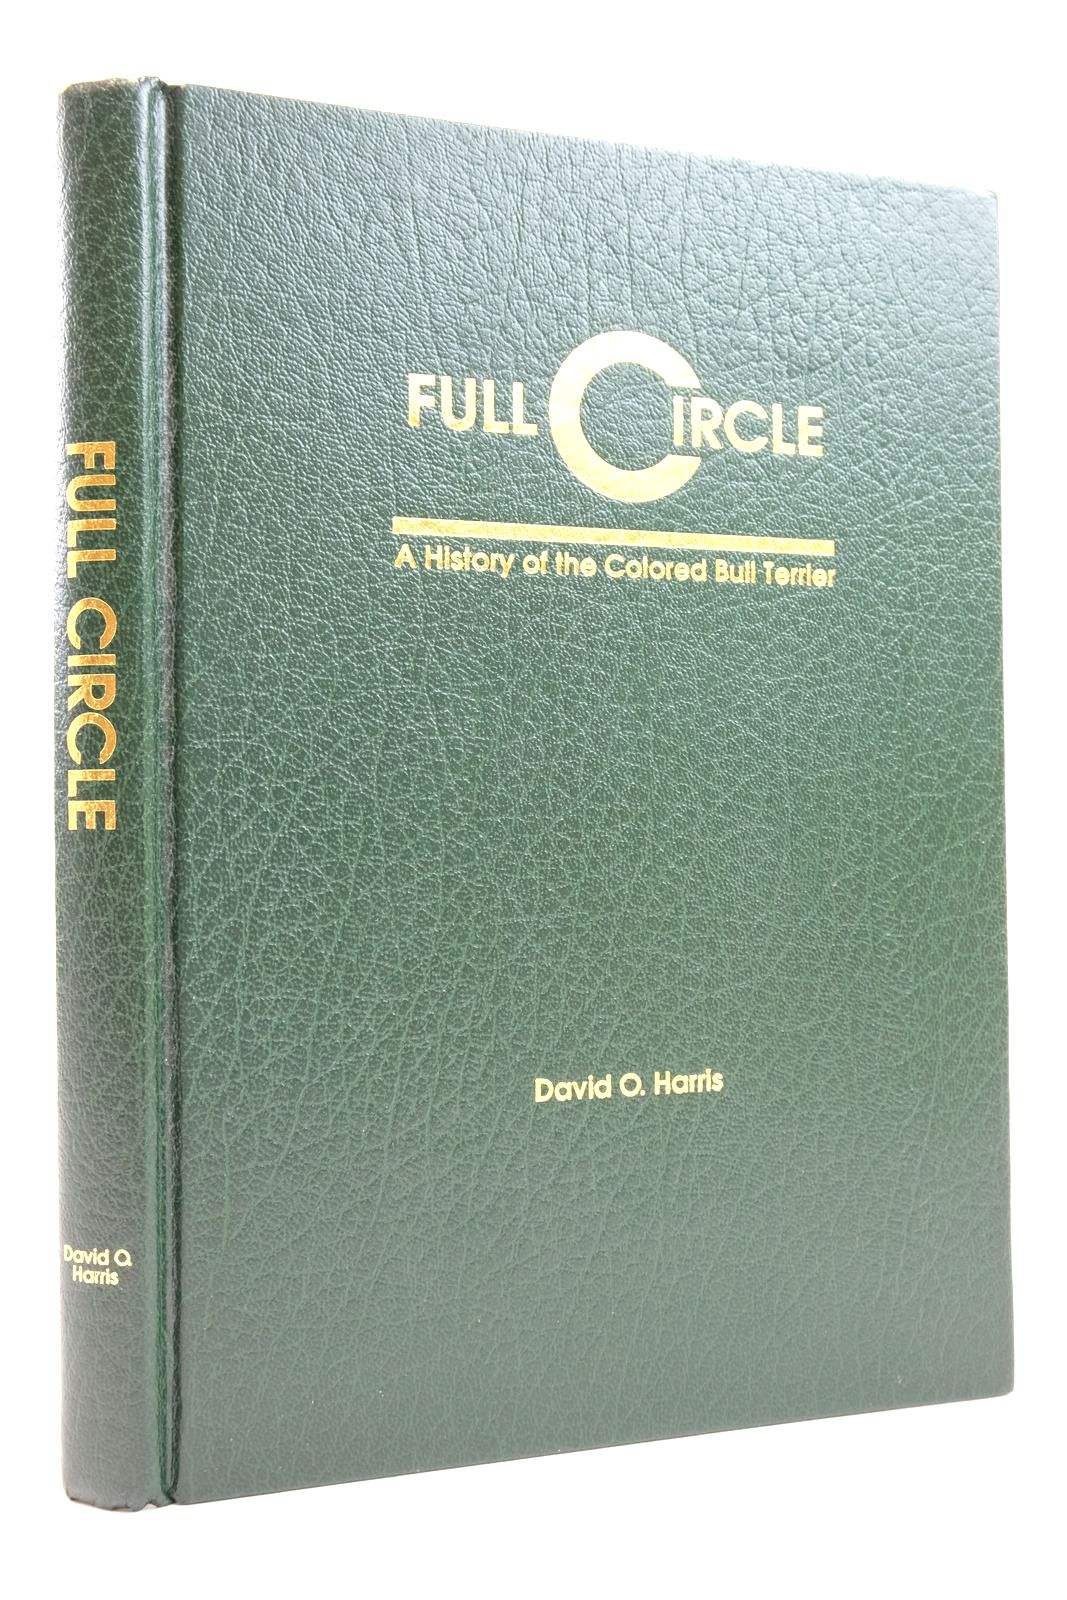 Photo of FULL CIRCLE: A HISTORY OF THE COLORED BULL TERRIER- Stock Number: 2136933